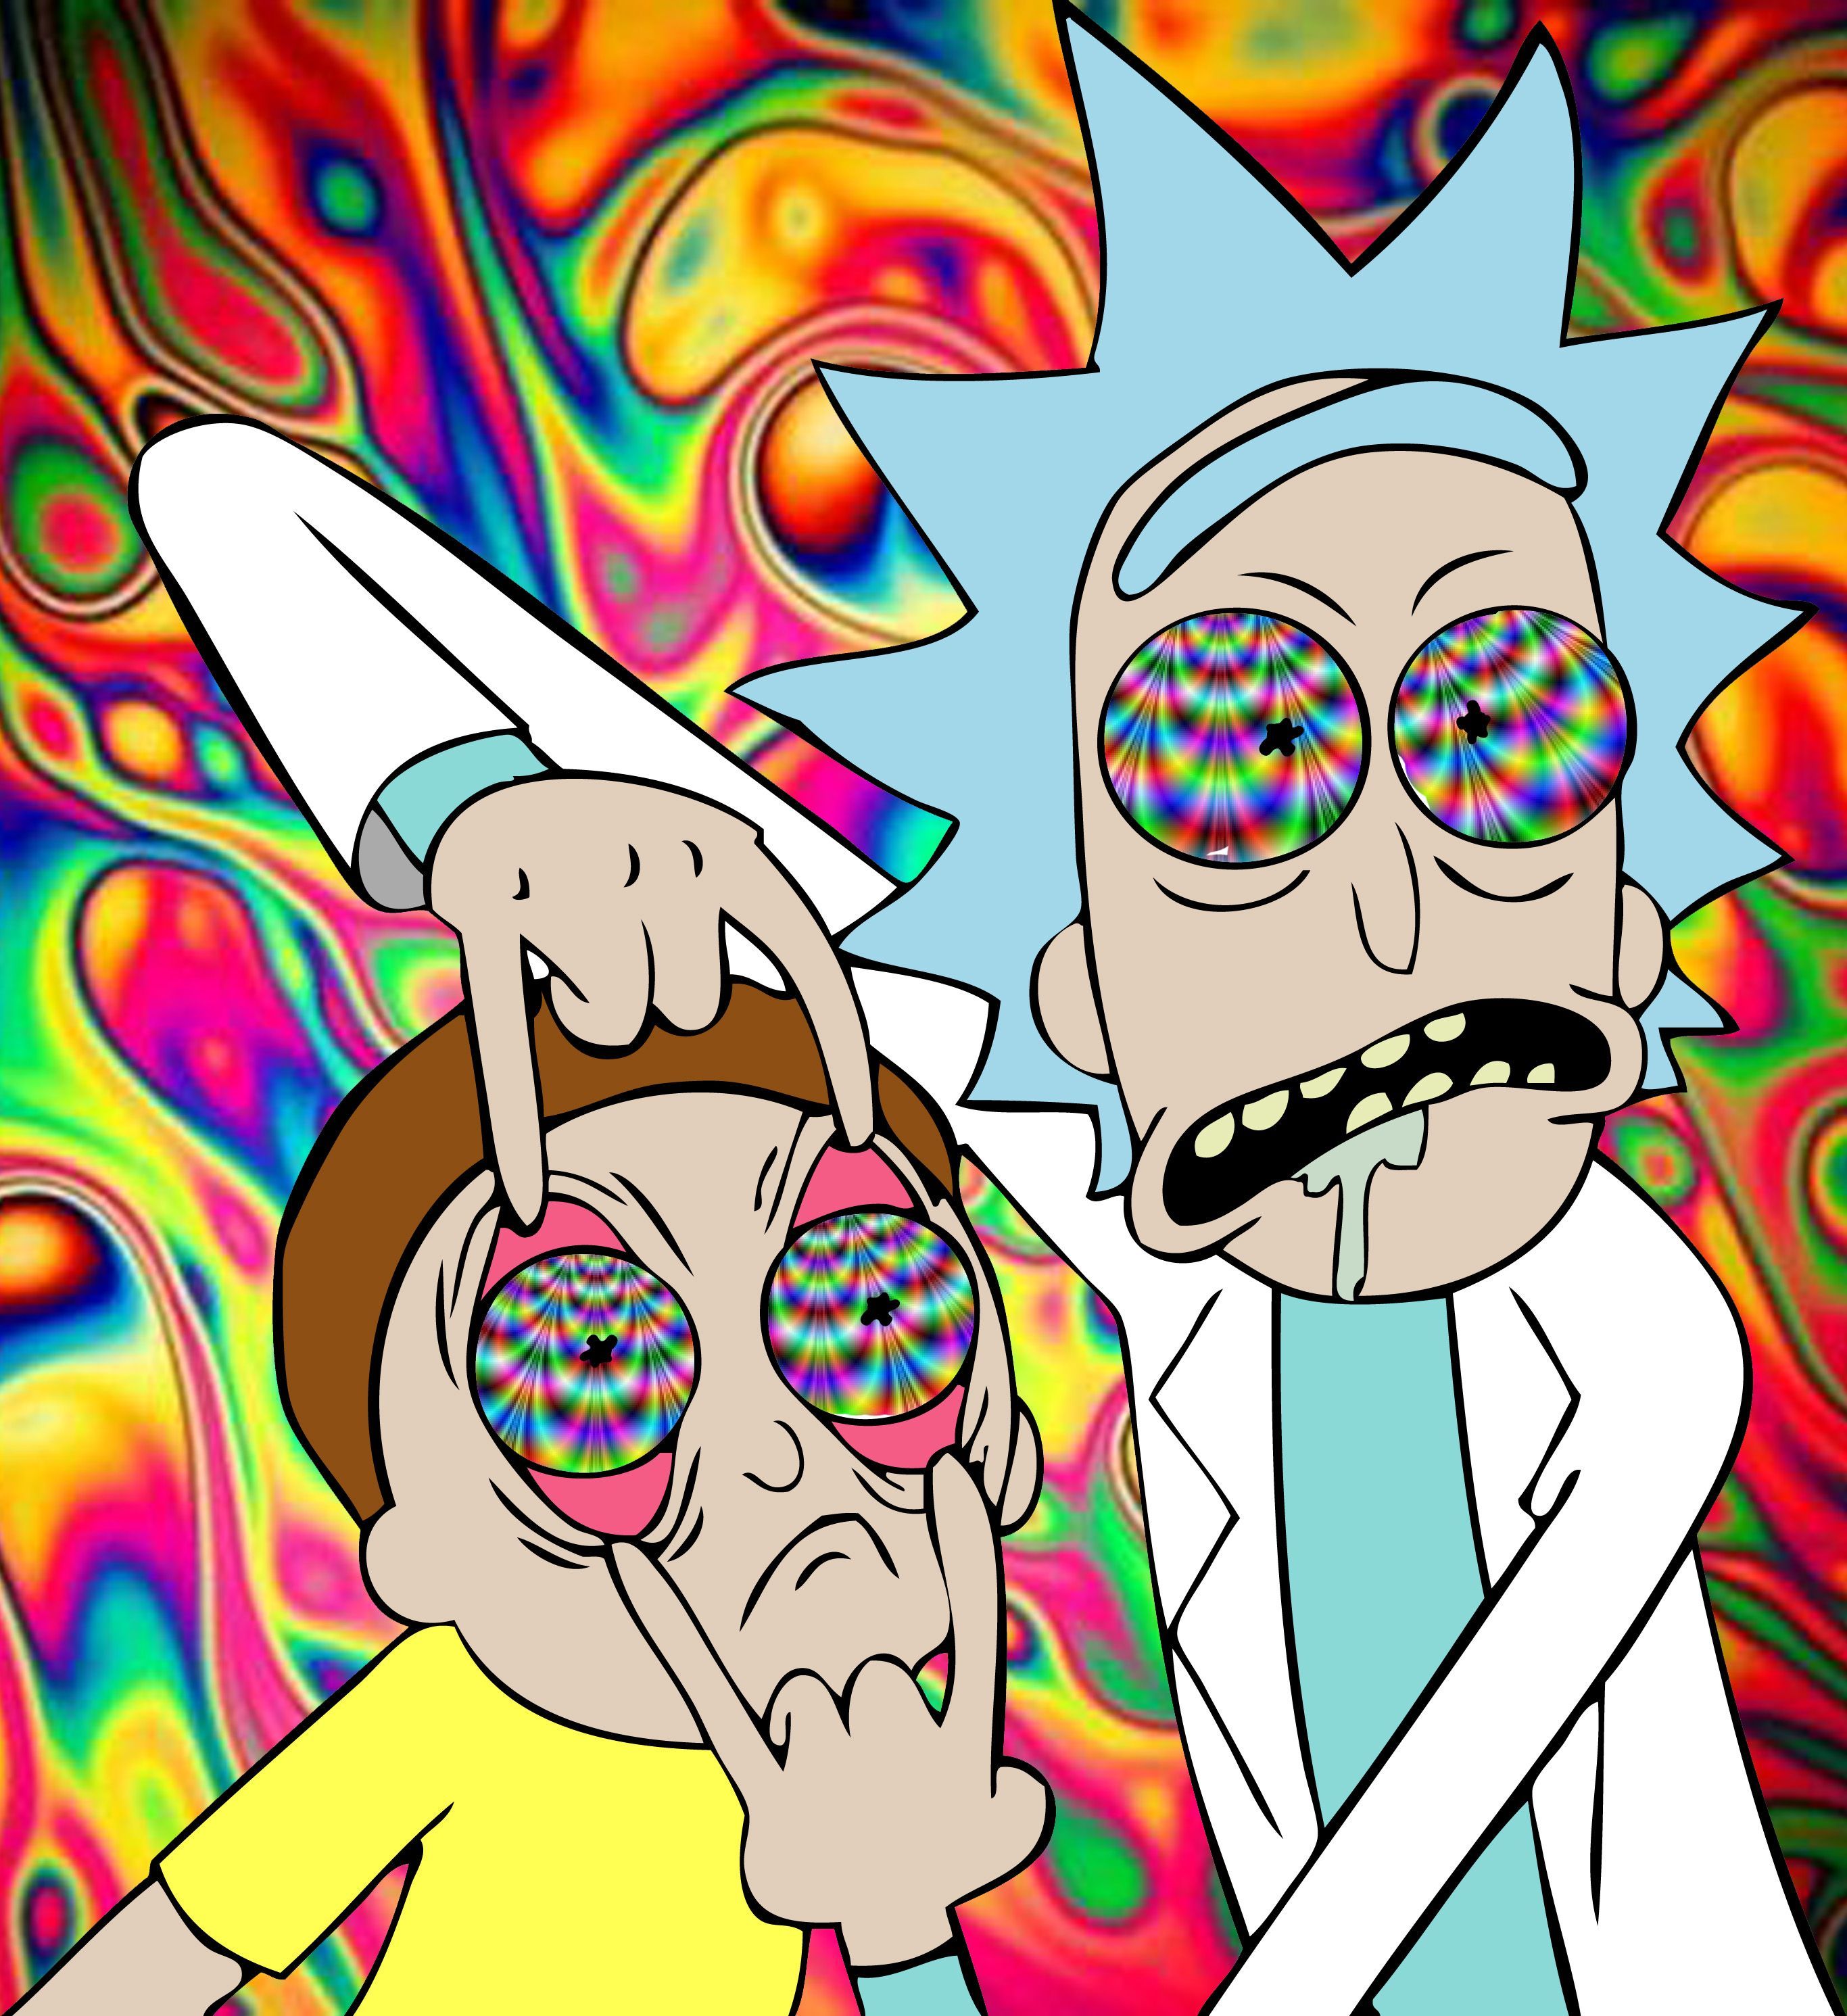 Rick and Morty Psychedelic Wallpapers.